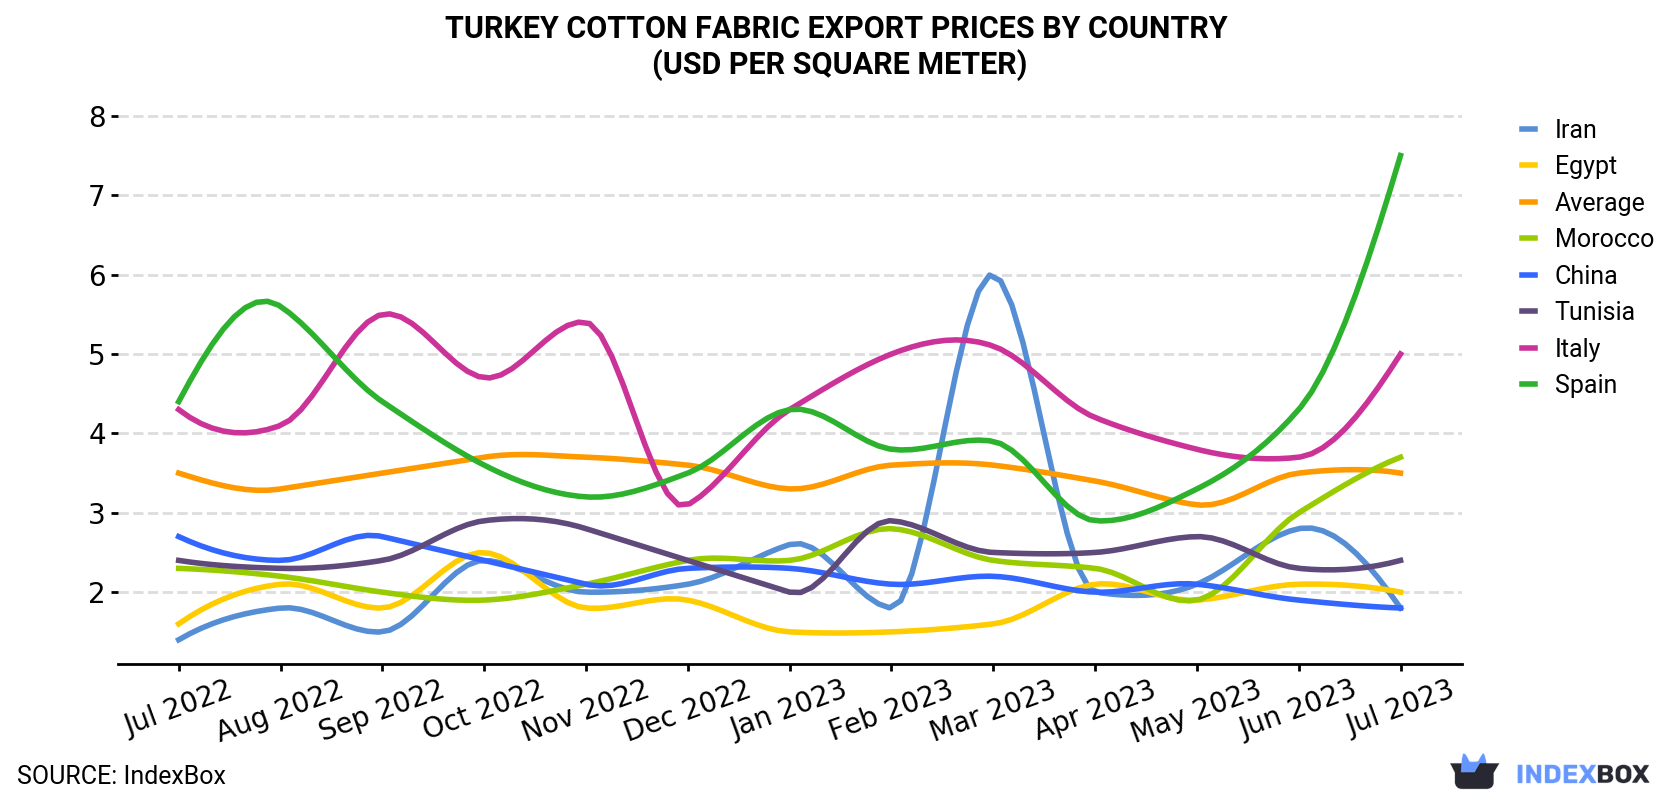 Turkey Cotton Fabric Export Prices By Country (USD Per Square Meter)